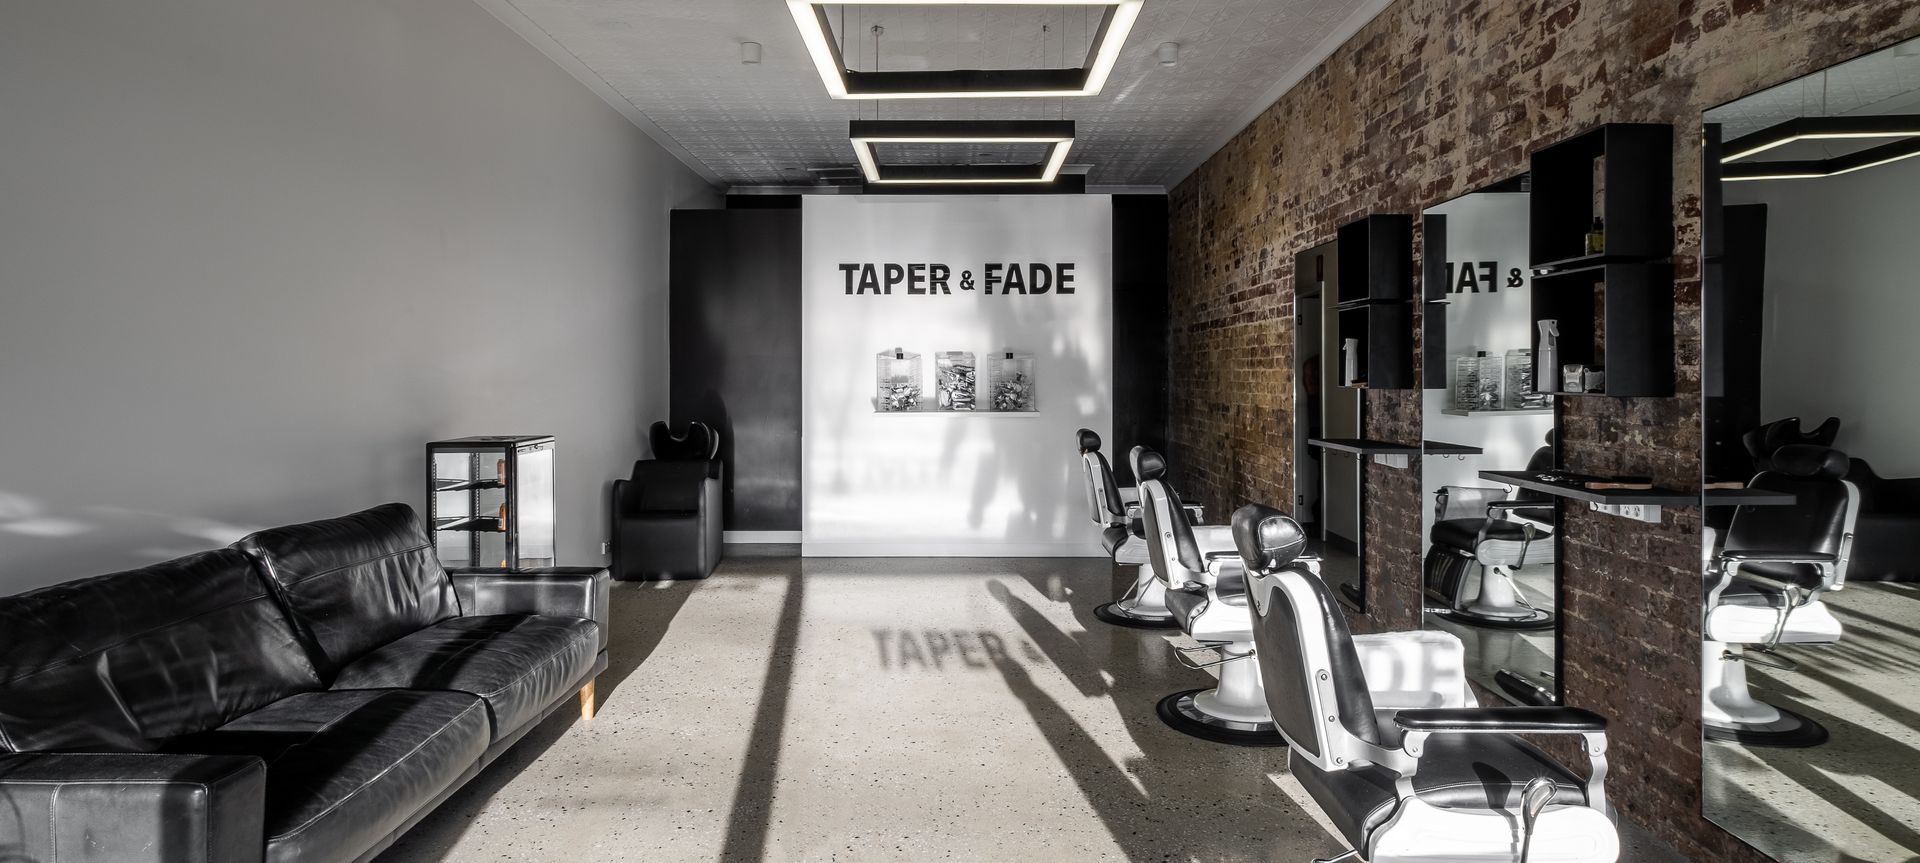 This is Taper & Fade banner